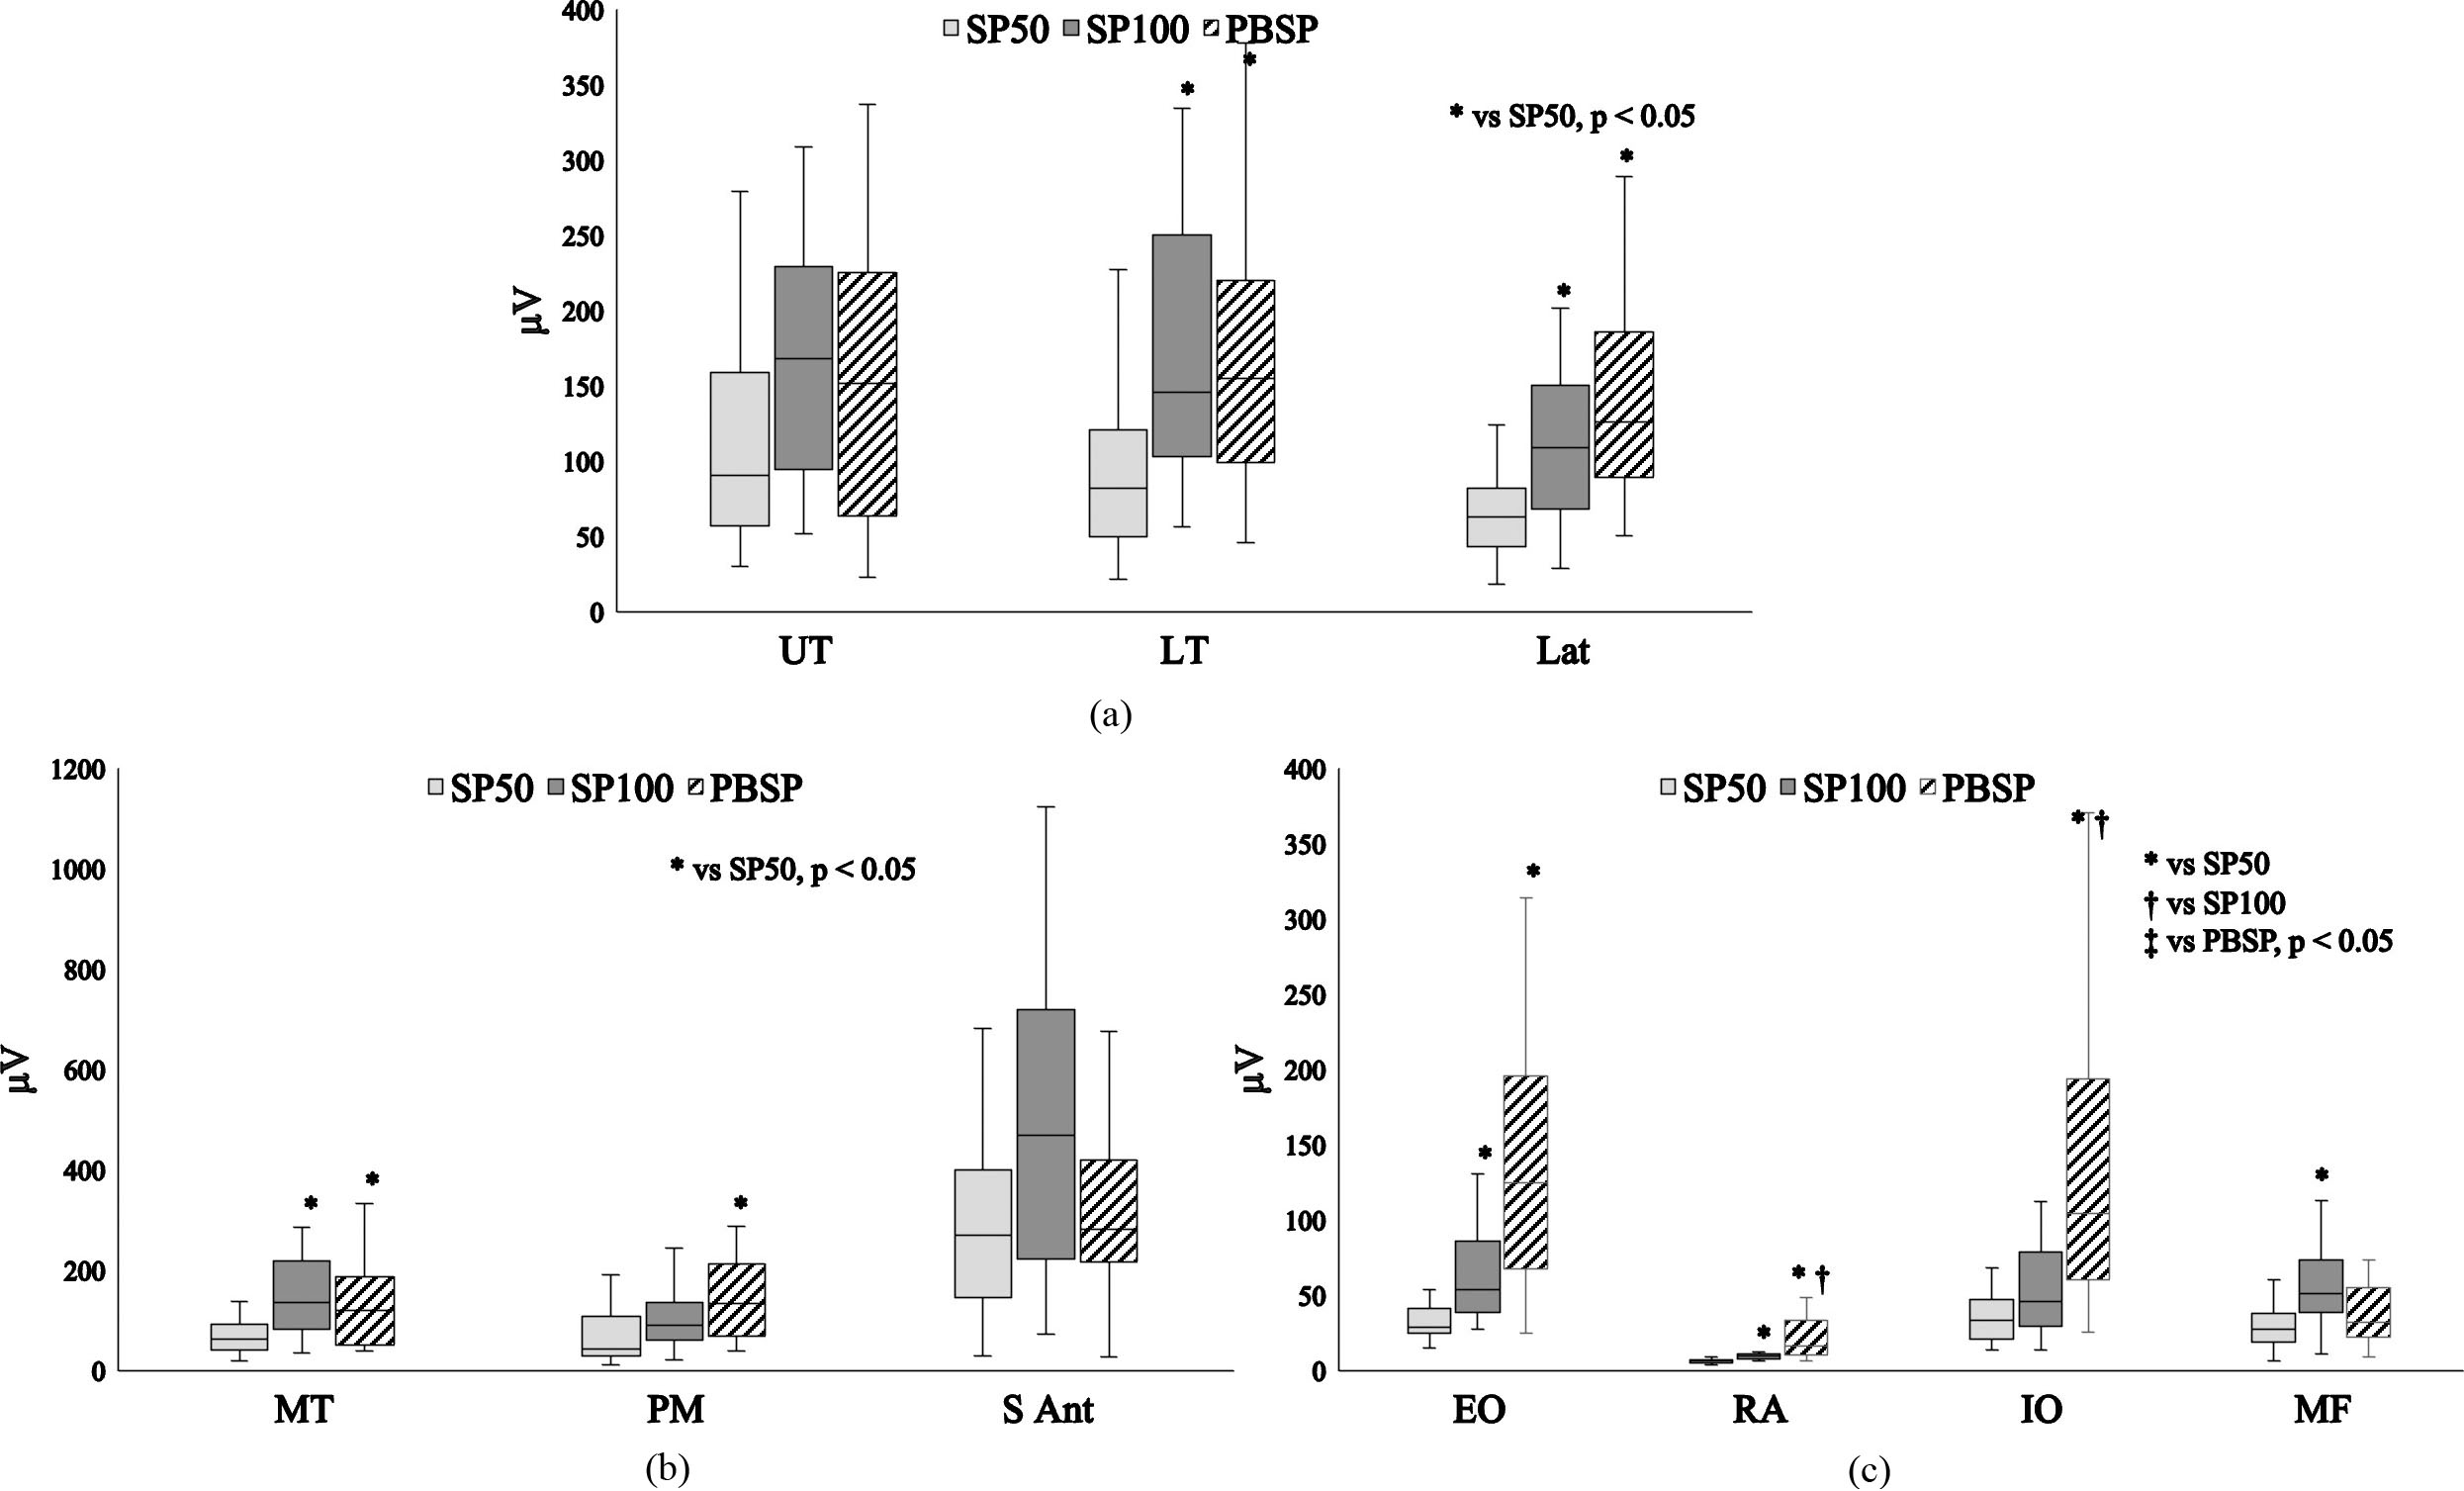 a. Differences in muscle activity between exercise tasks in the scapulothoracic muscles shoulder press downward. PBSP paper balloon shoulder press; SP50, shoulder press 50%; SP100, shoulder press 100%; UT, upper trapezius; LT, lower trapezius; Lat, latissimus dorsi. b. Differences in muscle activity between exercise tasks in the scapulohumeral muscles shoulder press downward. PBSP paper balloon shoulder press; SP50, shoulder press 50%; SP100, shoulder press 100%; MT, medial head of the triceps brachii; PM, clavicular part of the pectoralis major; S Ant, serratus anterior. c. Differences in muscle activity between exercise tasks in trunk muscles shoulder press downward. PBSP paper balloon shoulder press; SP50, shoulder press 50%; SP100, shoulder press 100%; EO, external oblique; RA, rectus abdominis; IO, internal oblique; MF, multifidus.